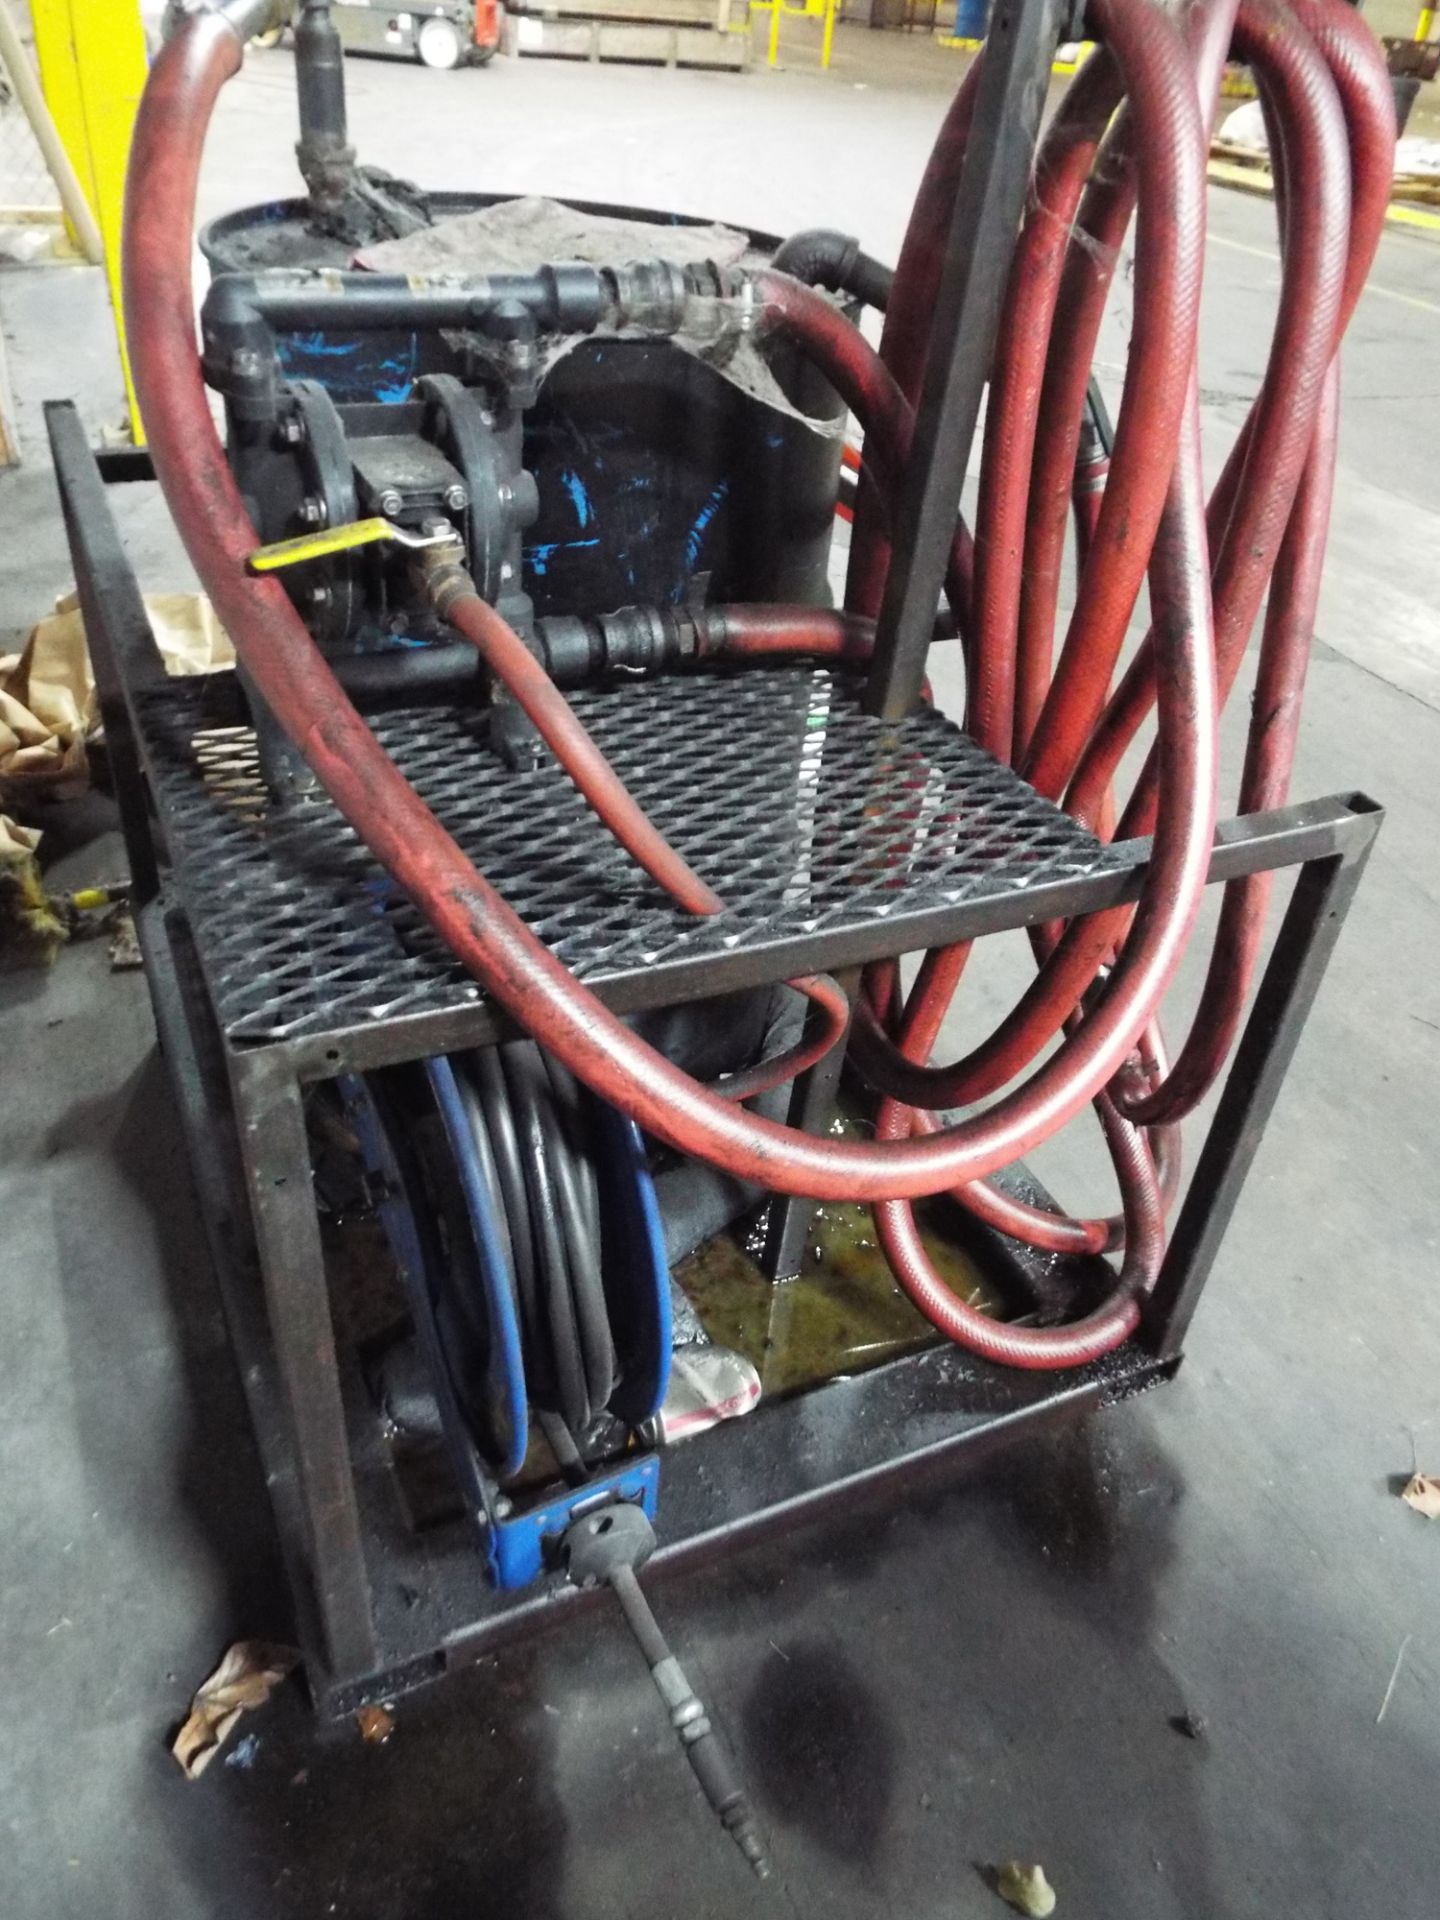 LUBRICANT PLATFORM WITH PUMP, HOSES, AIR HOSE REEL AND DRUM - Image 2 of 2